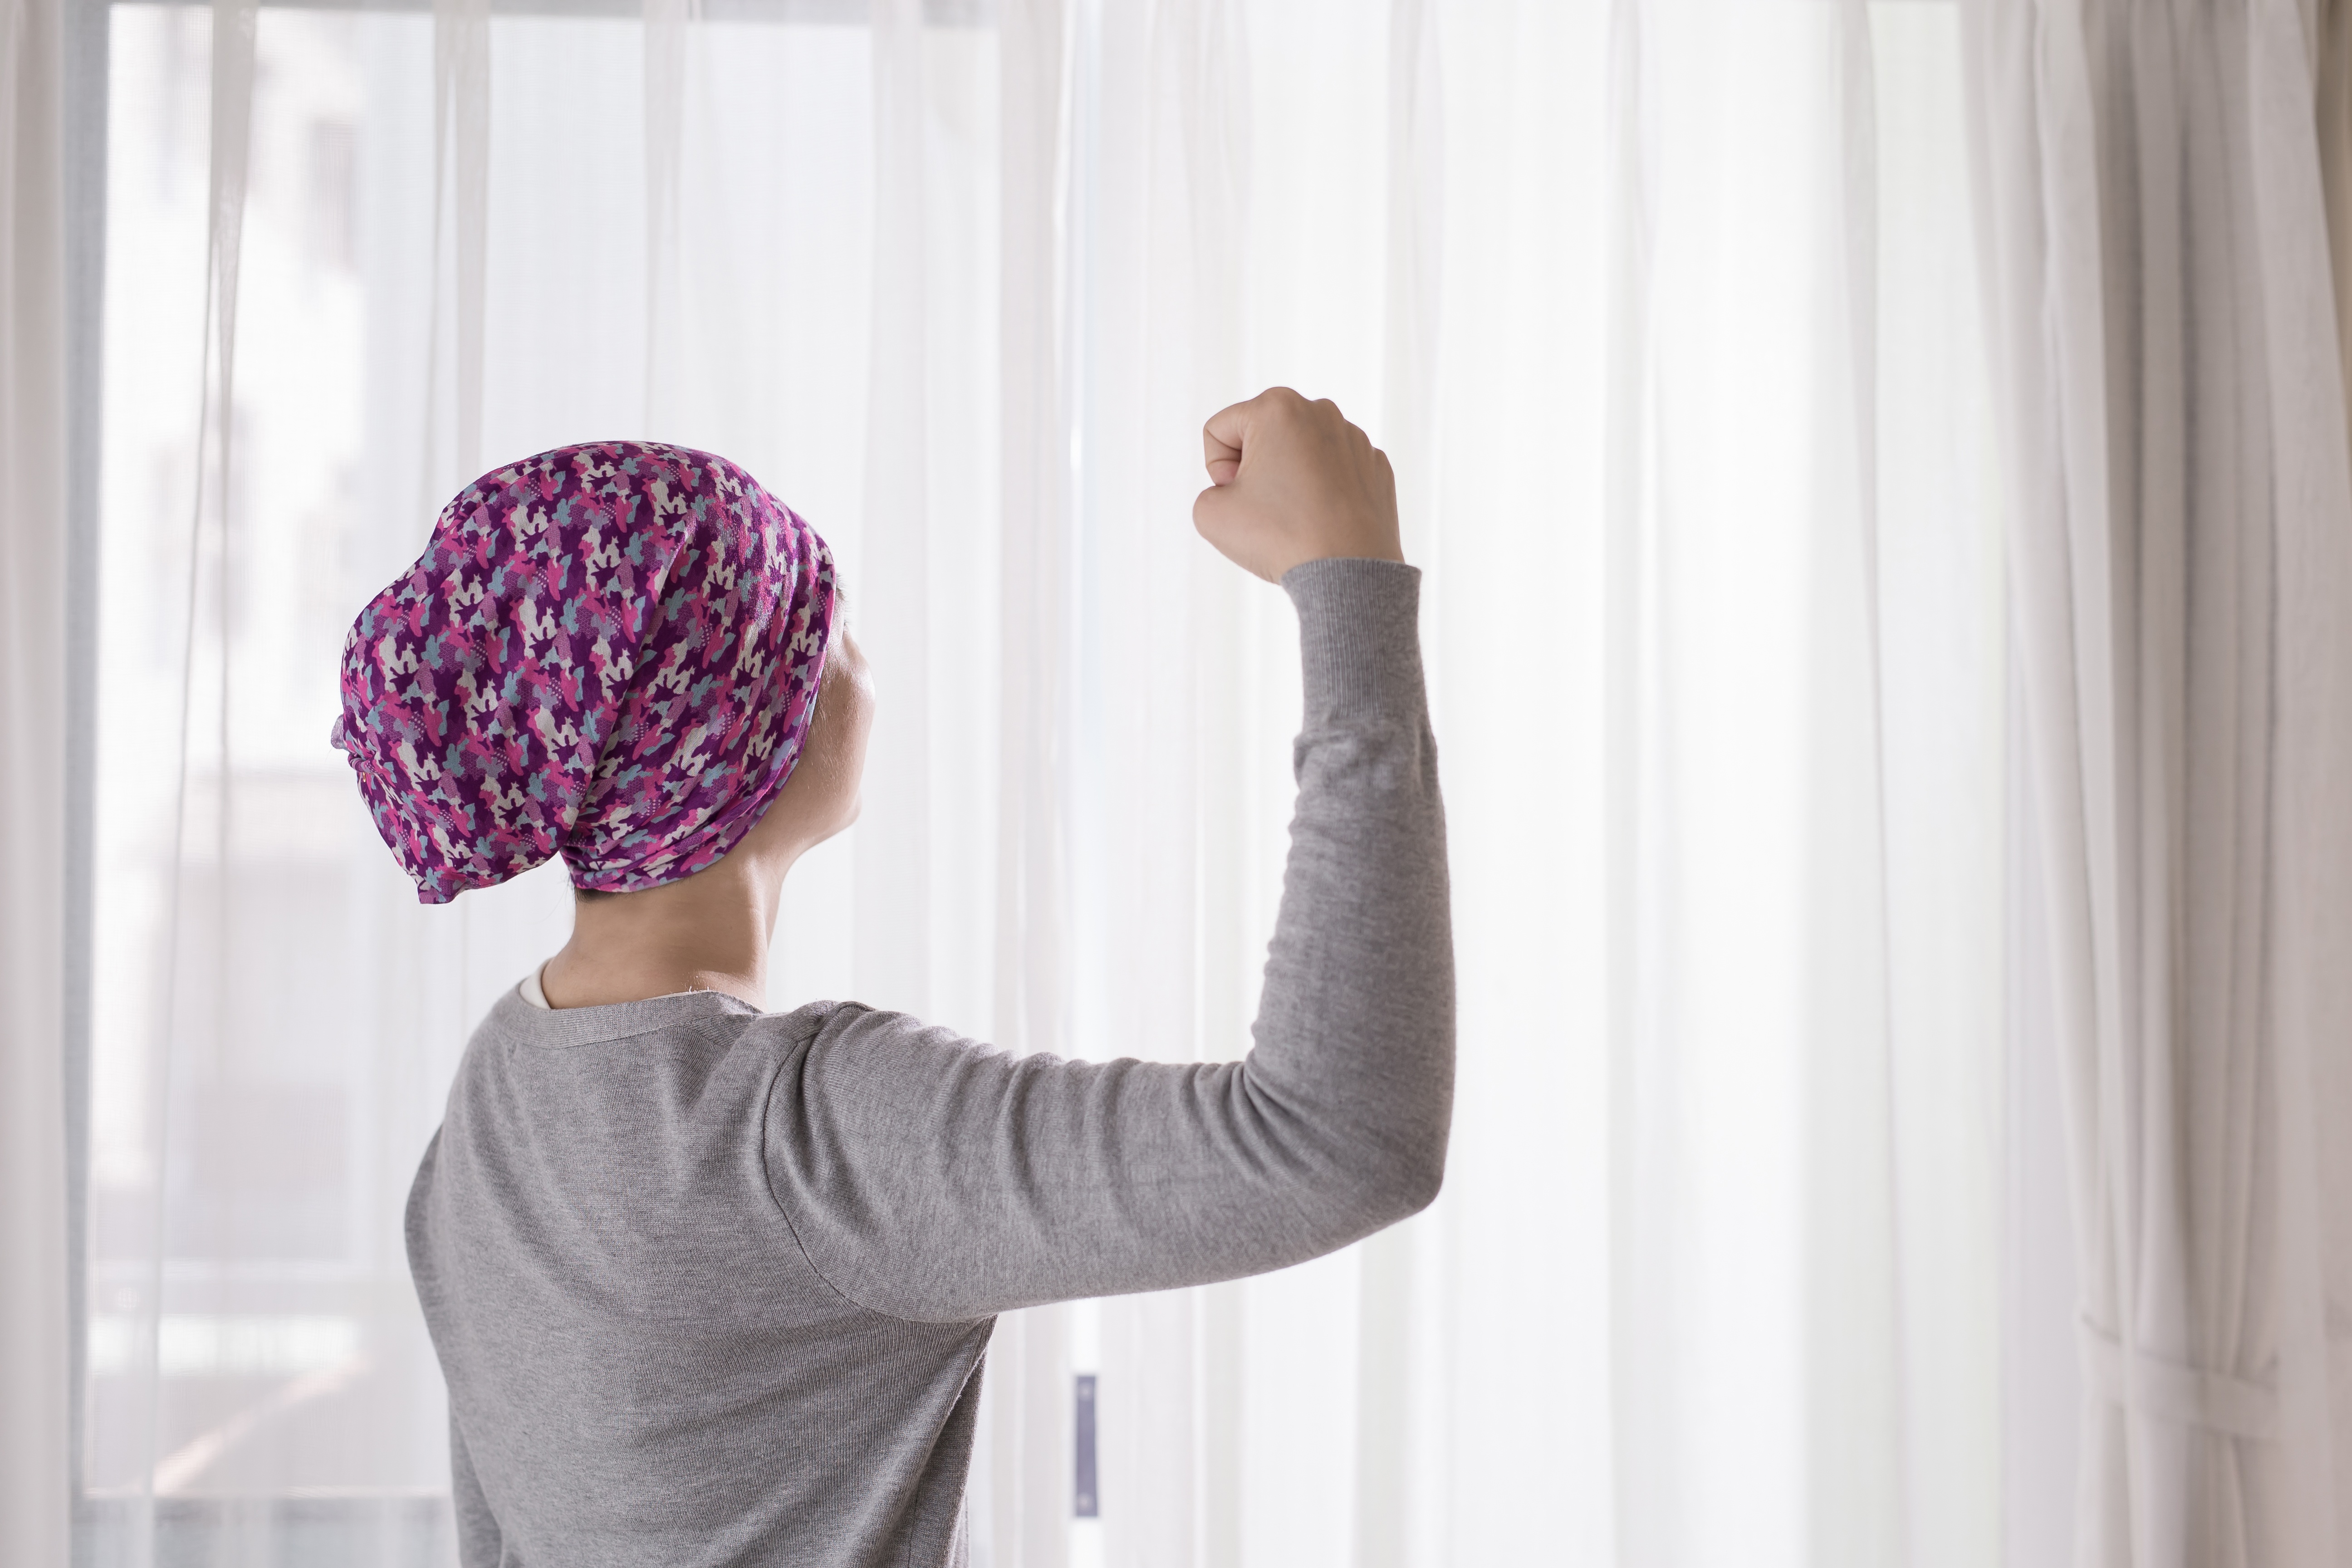 Physical Therapy Can Help Alleviate Cancer Symptoms